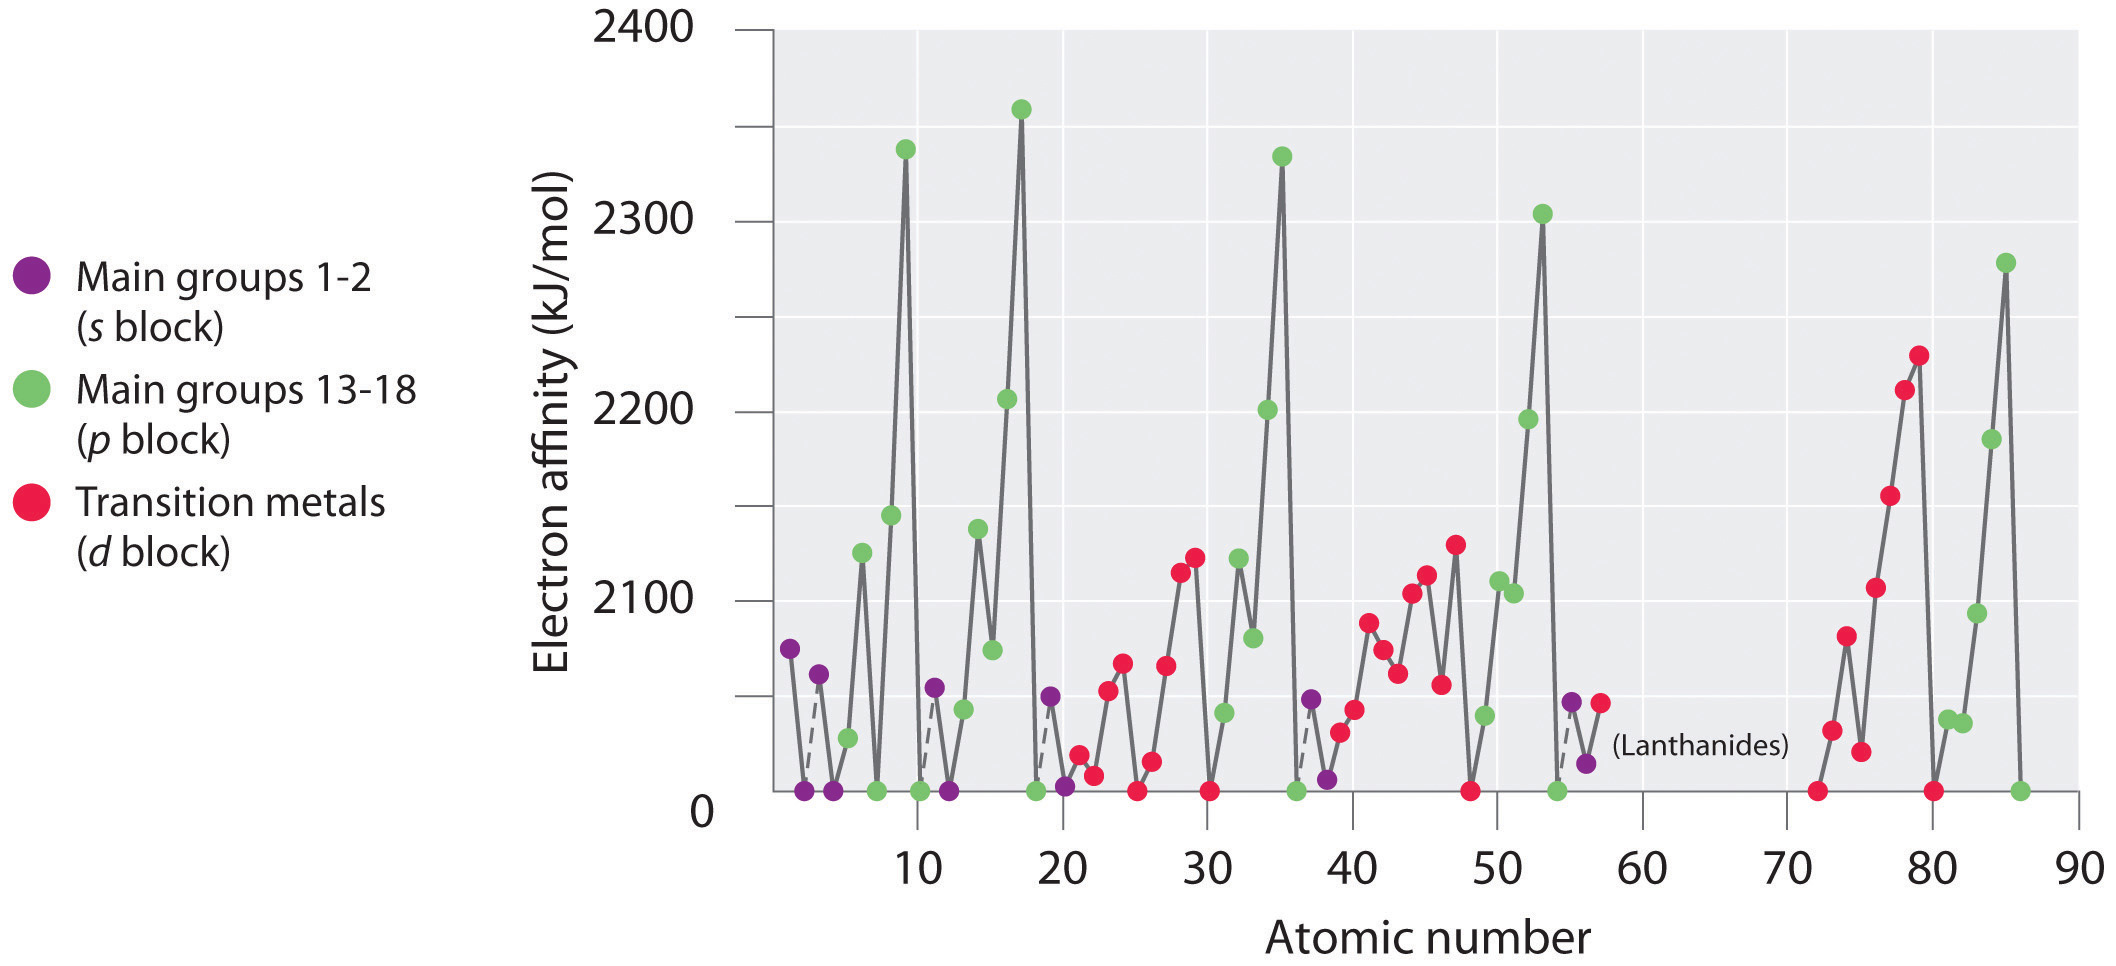 Graph of atomic number versus electron affinity in kJ/mol for the s block, p block, and d block.